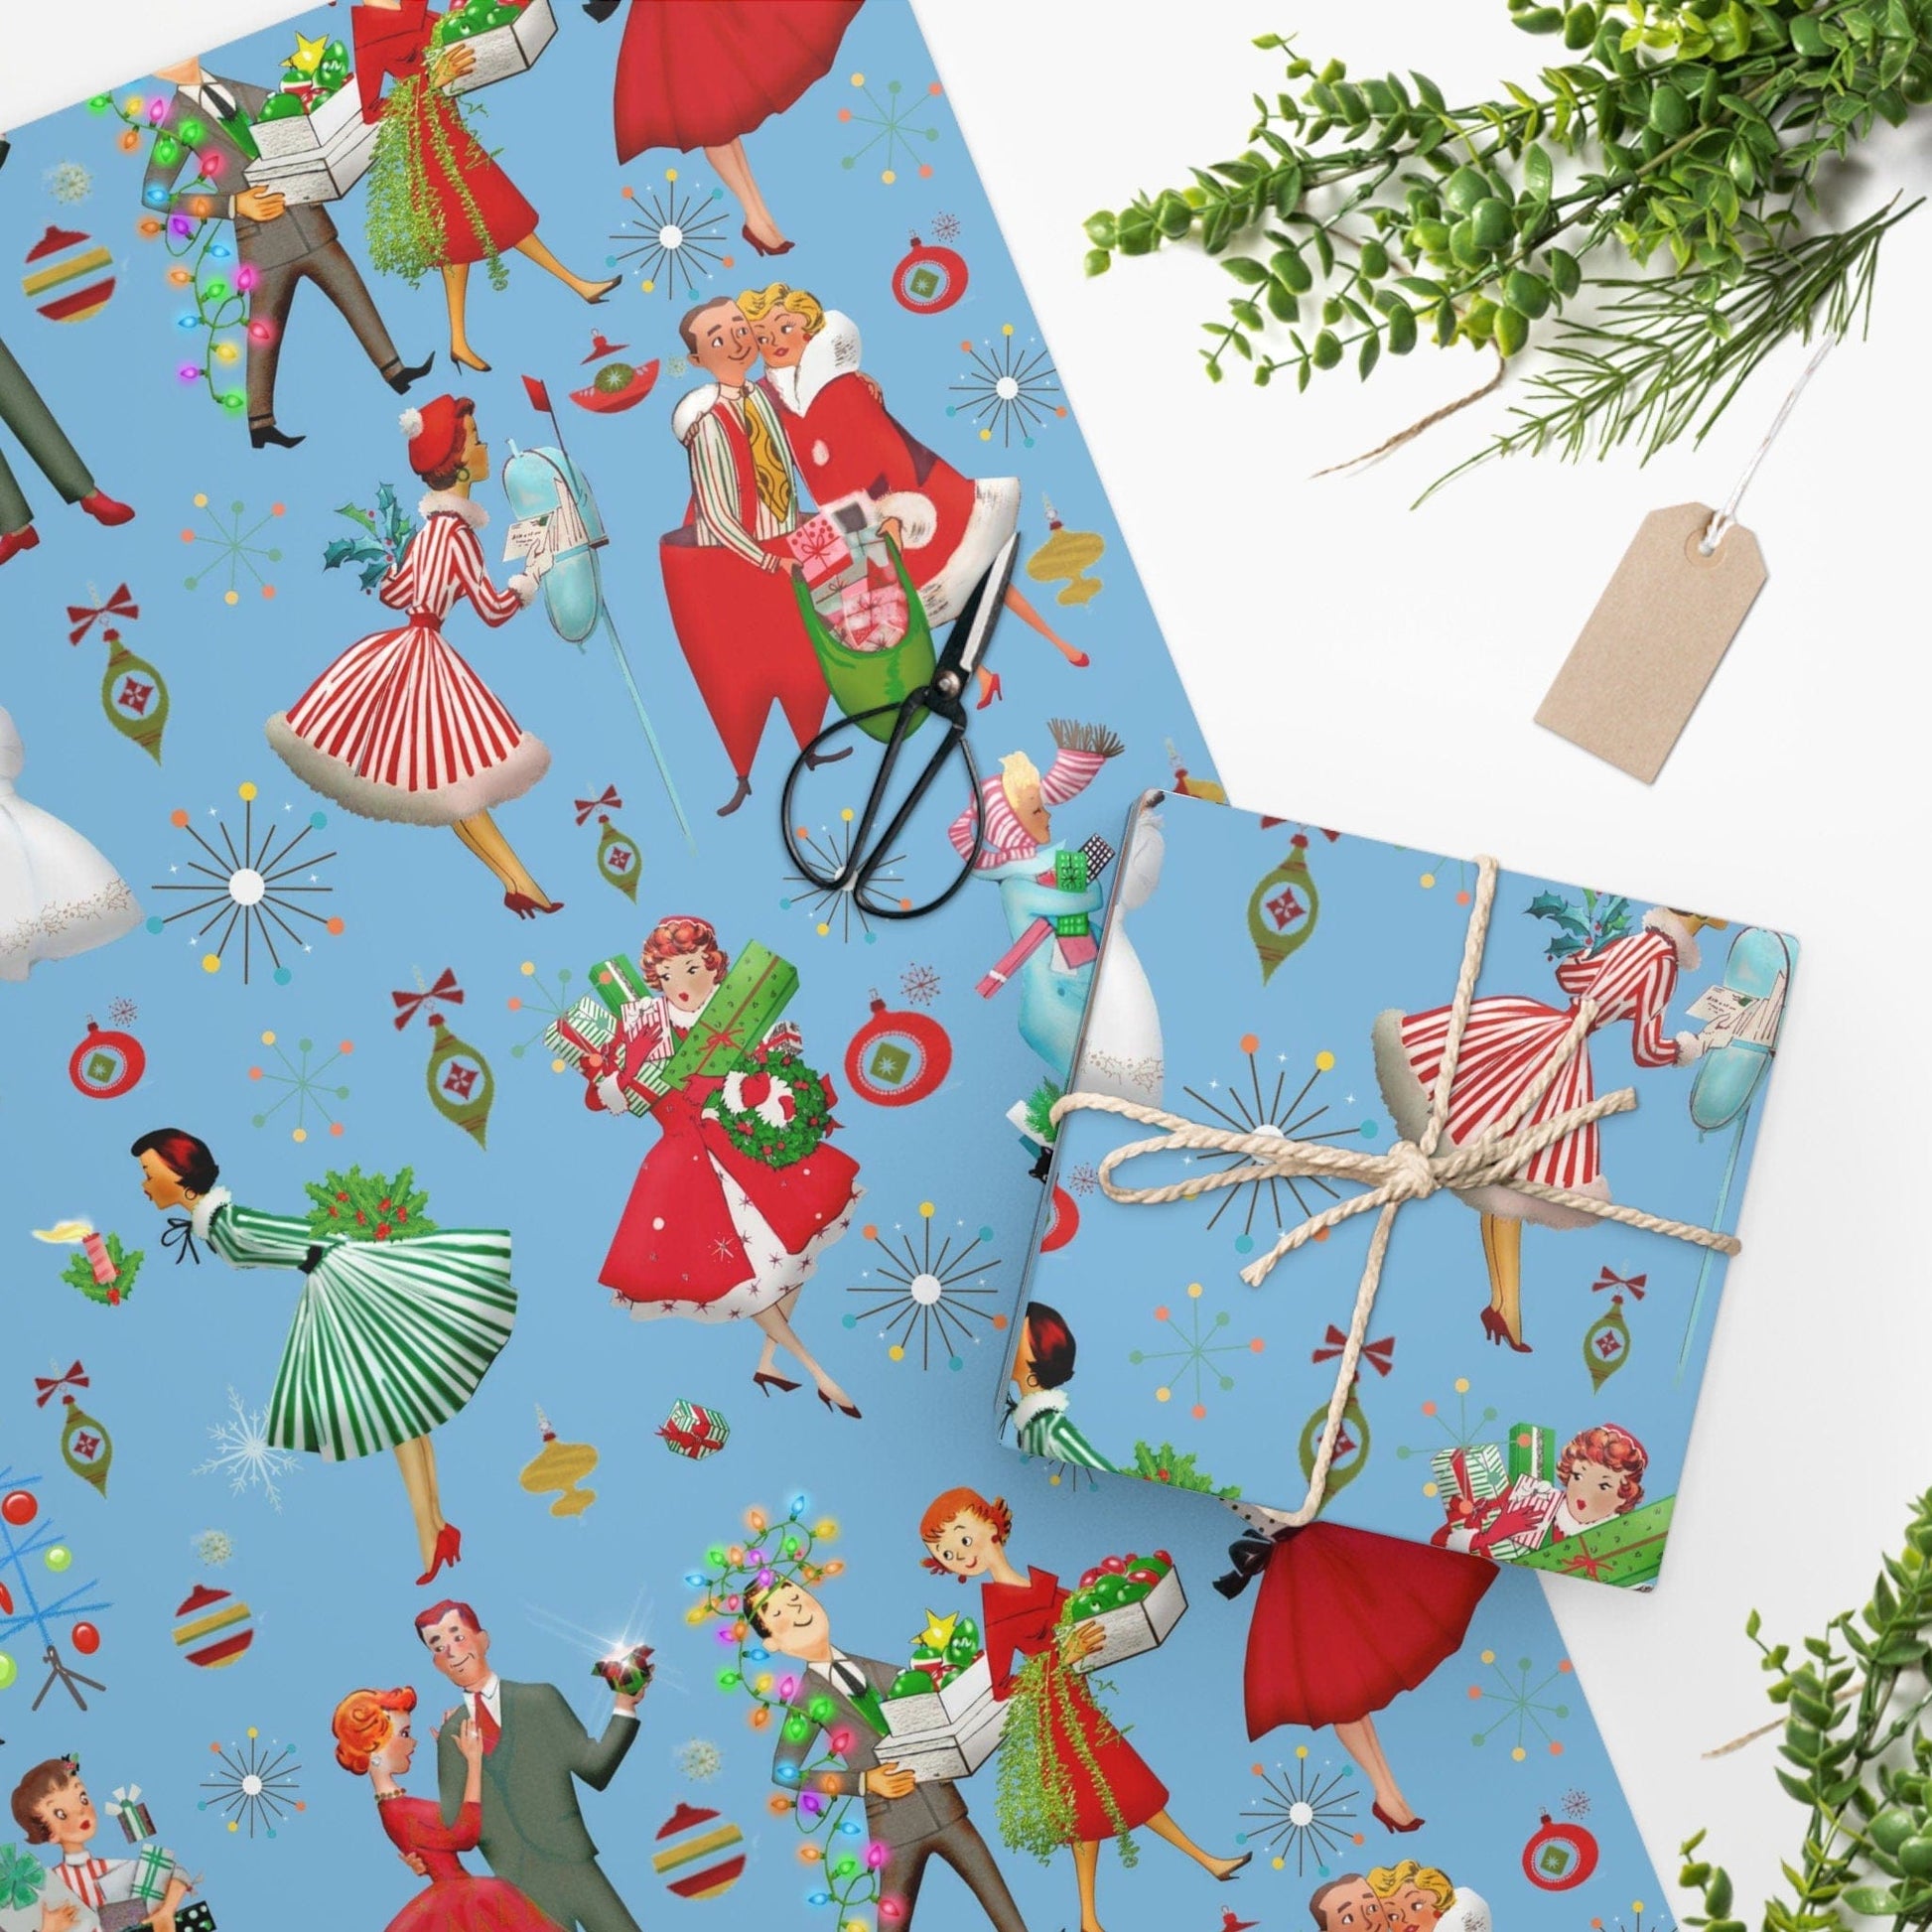 Vintage Gibson All Occasion Wrapping Paper Alice in Wonderland One